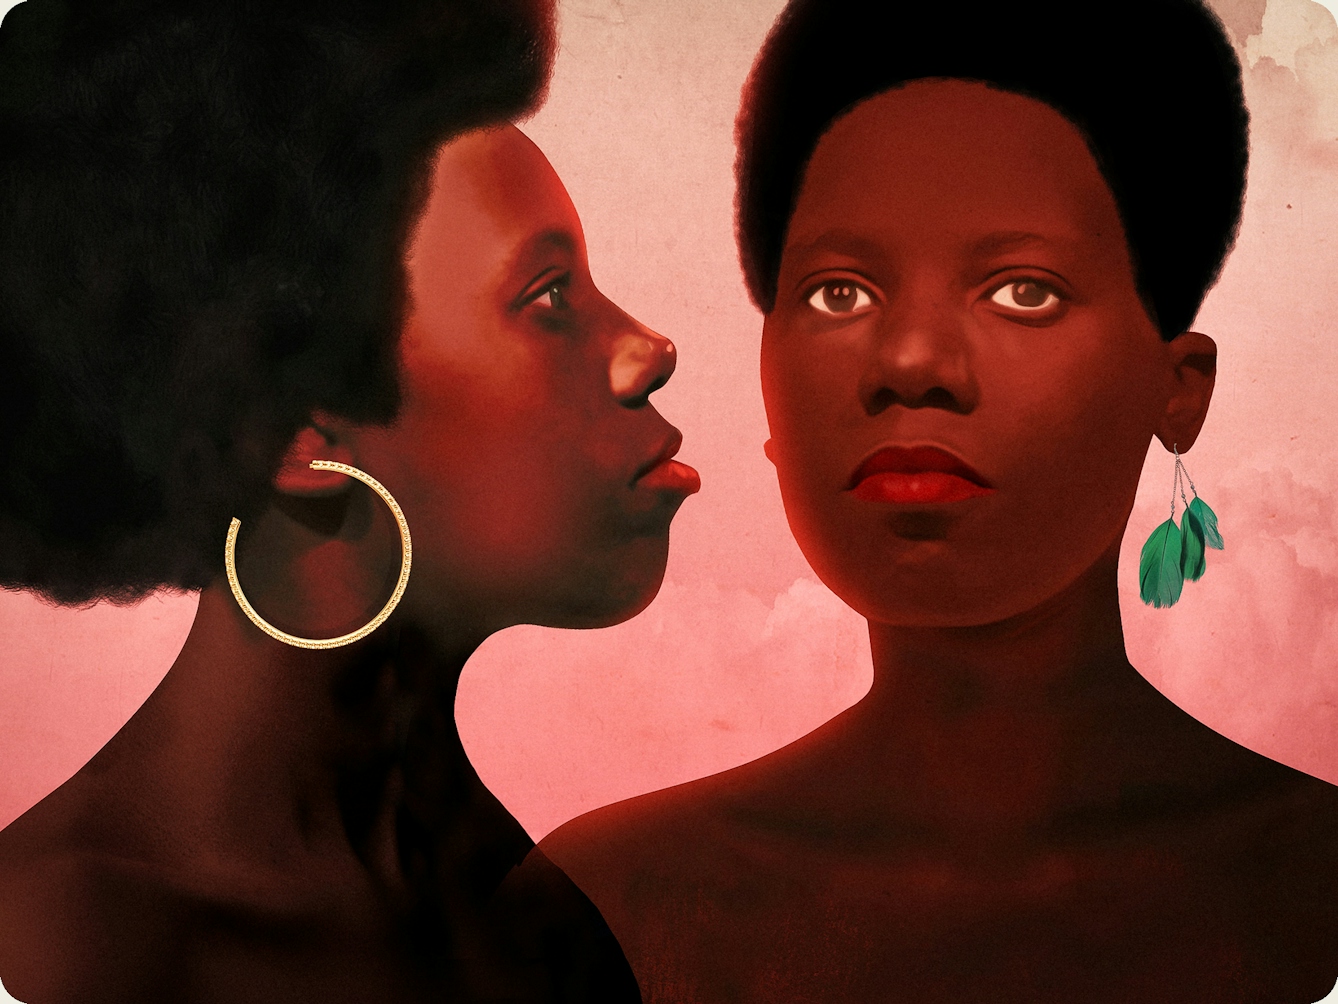 Detail from a larger mixed media digital artwork combining found imagery from vintage magazines and books with painted and textured elements. The overall hues are reds and oranges, with elements of subtle greens. At the centre of the artwork are two young black women pictured from the shoulders up. One is looking straight out at the viewer with an earring in her left ear made up of a cluster of hanging green feathers. The other woman, placed to the left is pictured in profile looking towards the right. She has a large golden hooped earring in her right ear. They both have a strong confident expression on their faces. Behind them is a graduated pink and yellow/green sky containing fluffy clouds.